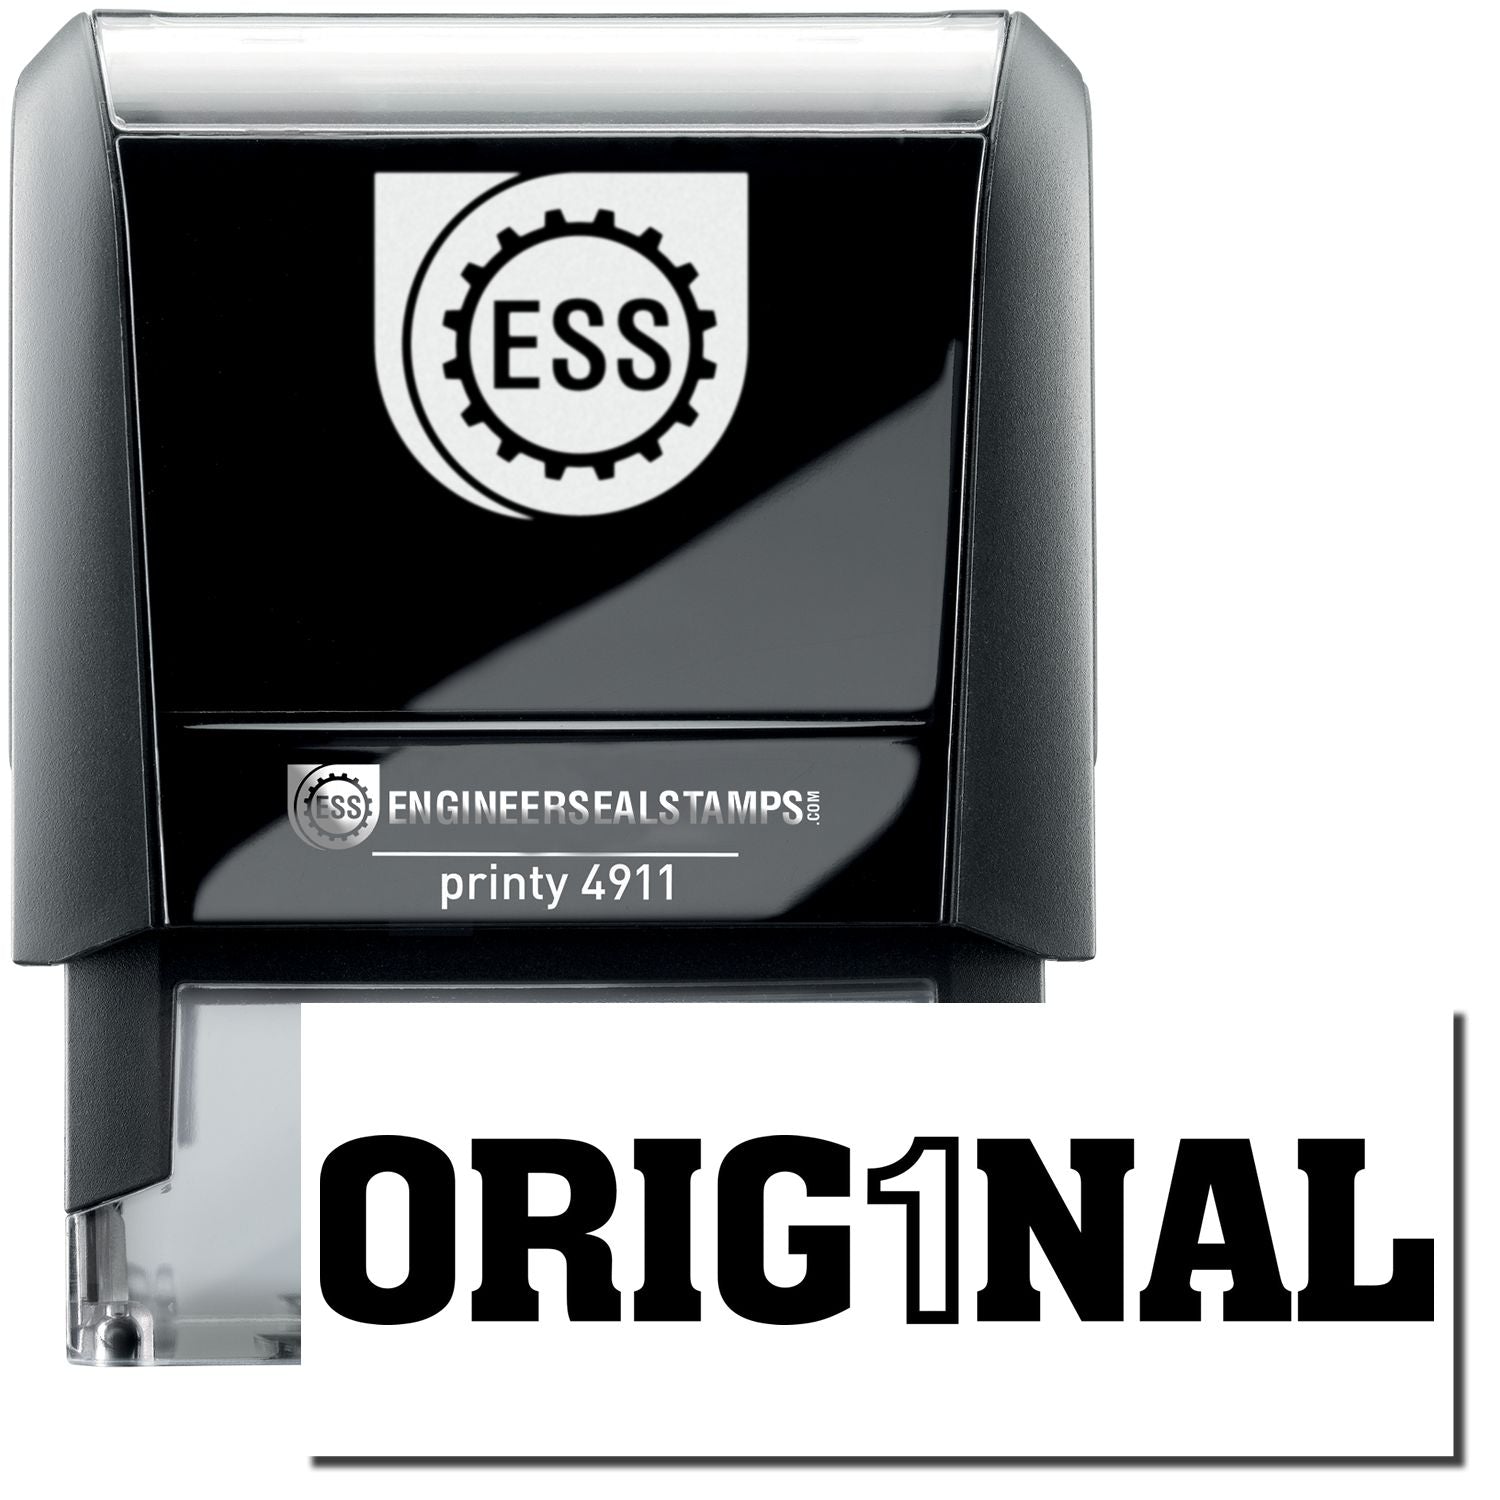 A self-inking stamp with a stamped image showing how the text "ORIG1NAL" is displayed after stamping.